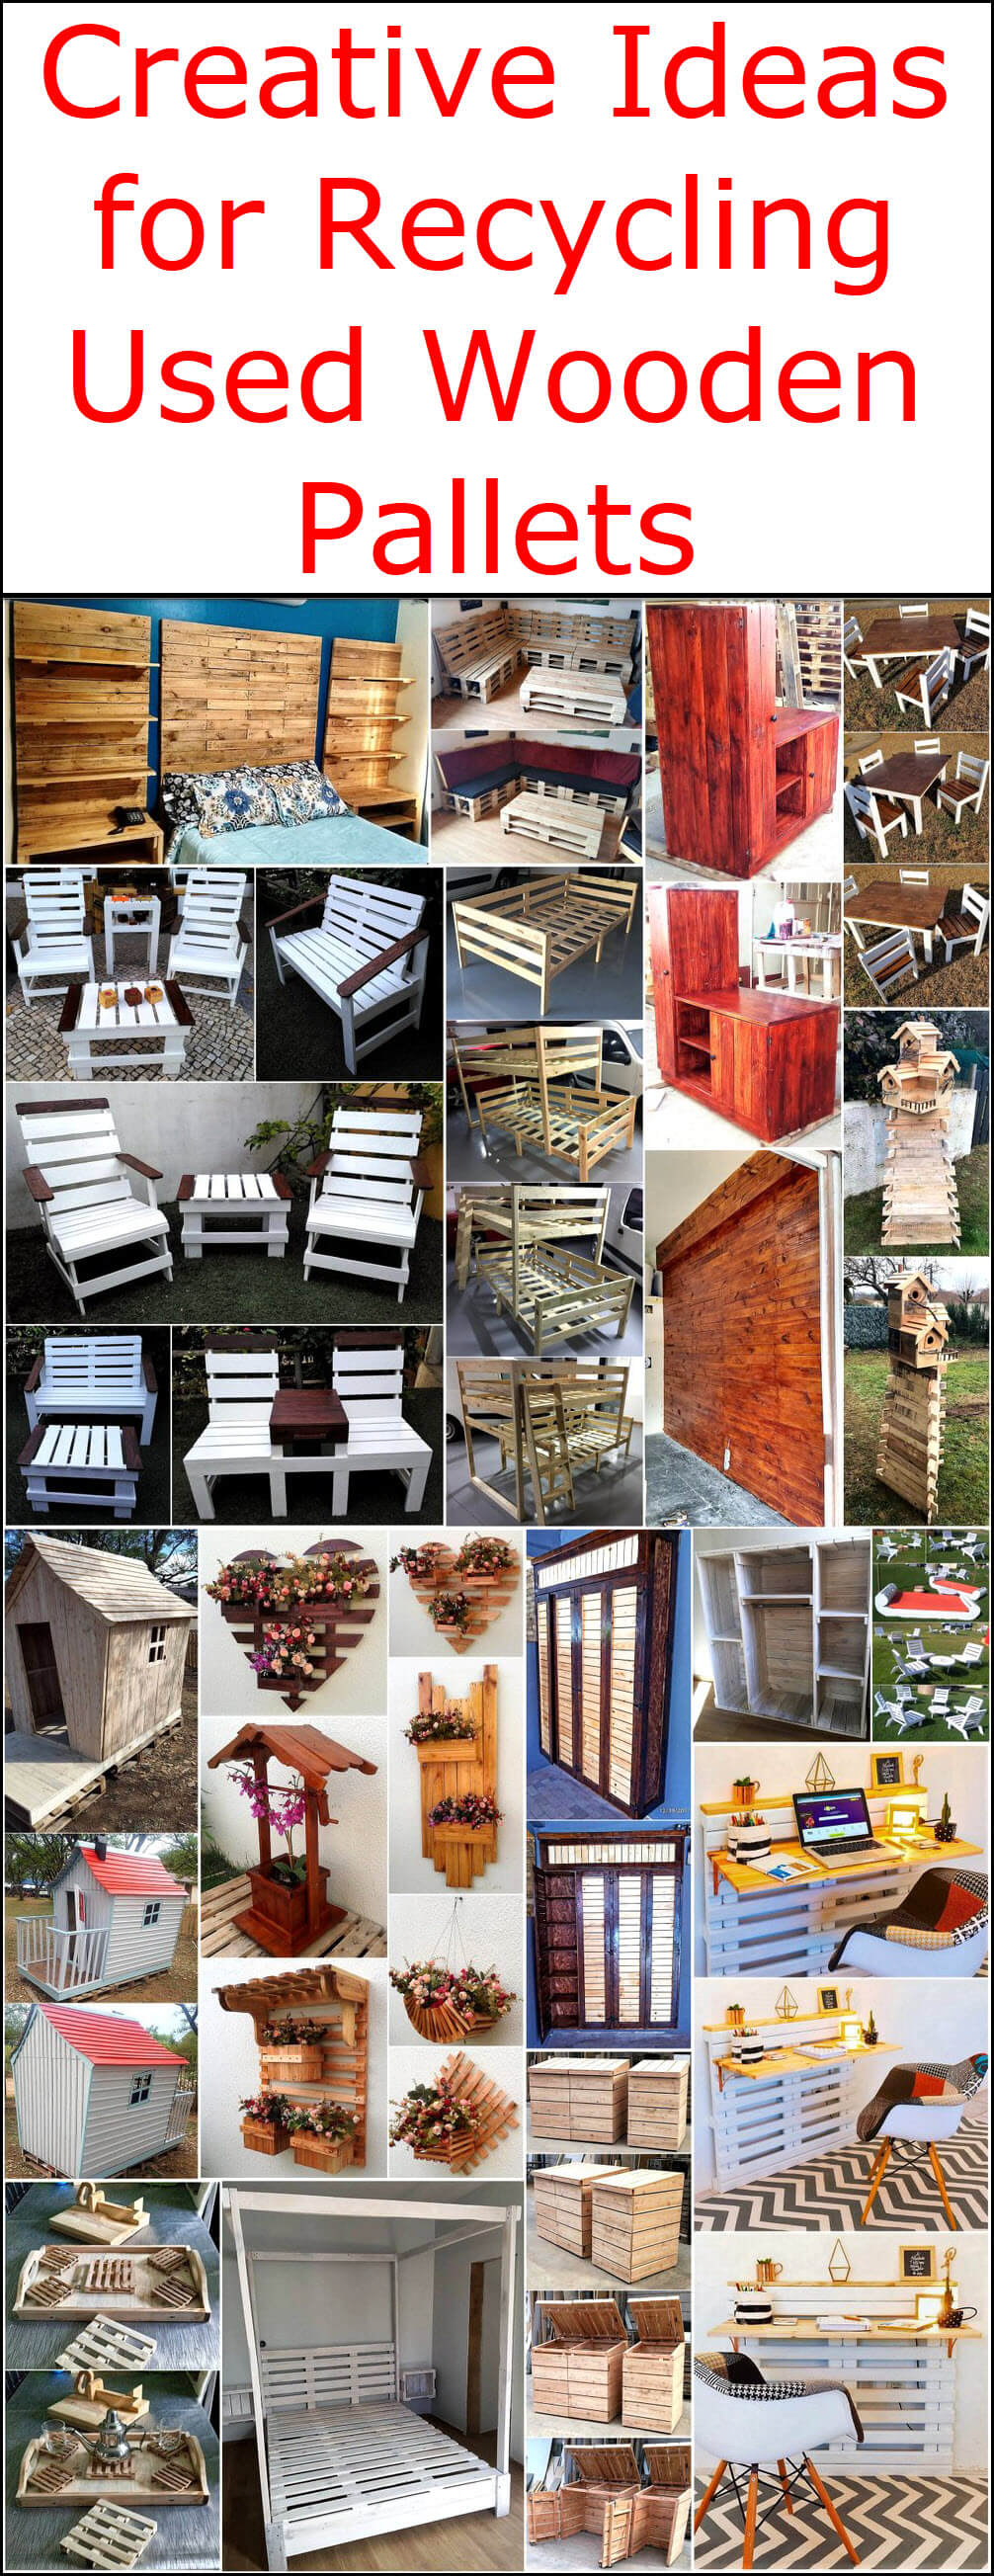 Creative Ideas for Recycling Used Wooden Pallets